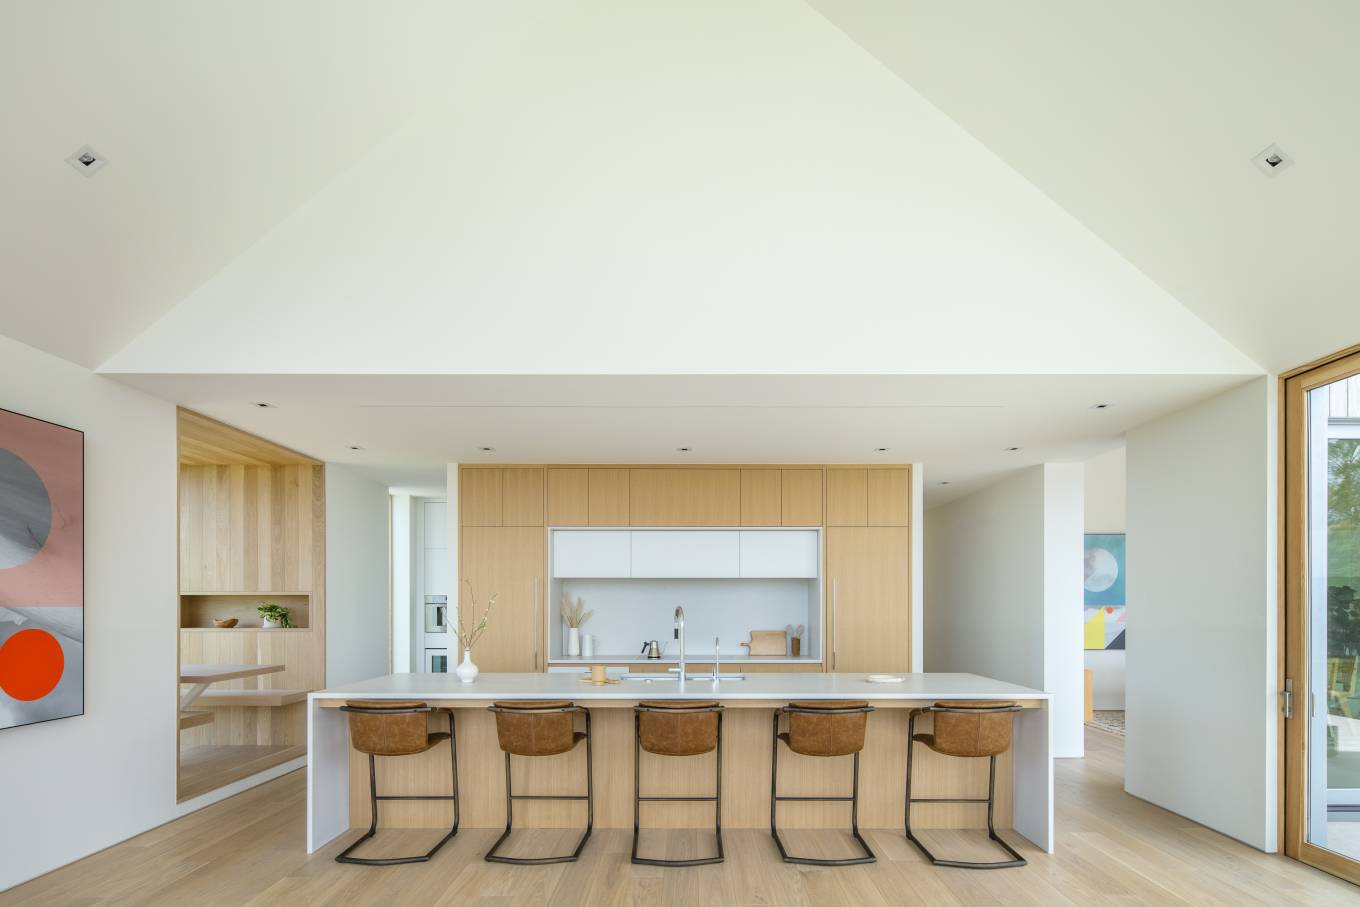 The expressive, folded roof forms are playful, and varied yielding assortment of light filled spaces that are both intimate and cozy as well as expansive and voluminous.